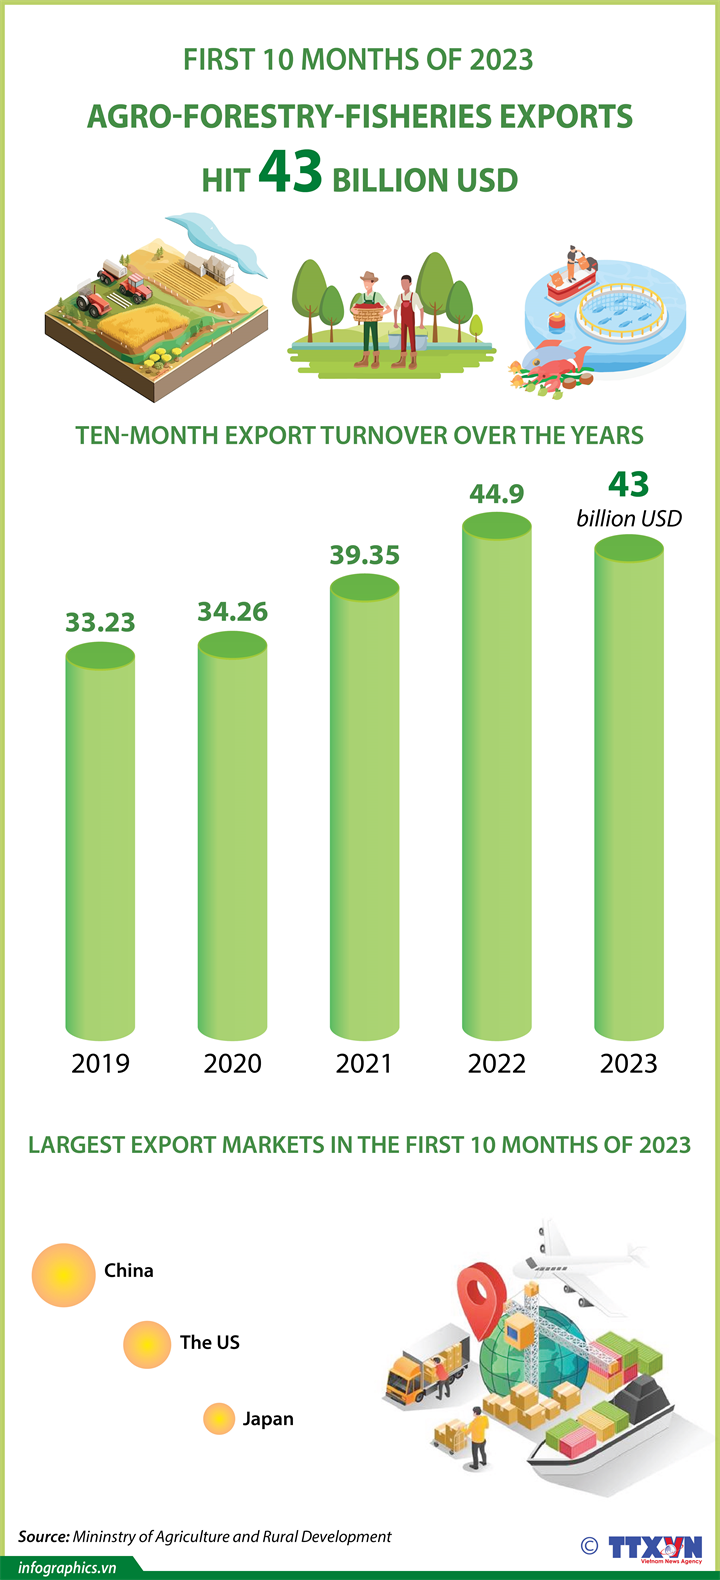 First 10 months of 2023: Agro-forestry-fisheries exports hit over 43 billion USD